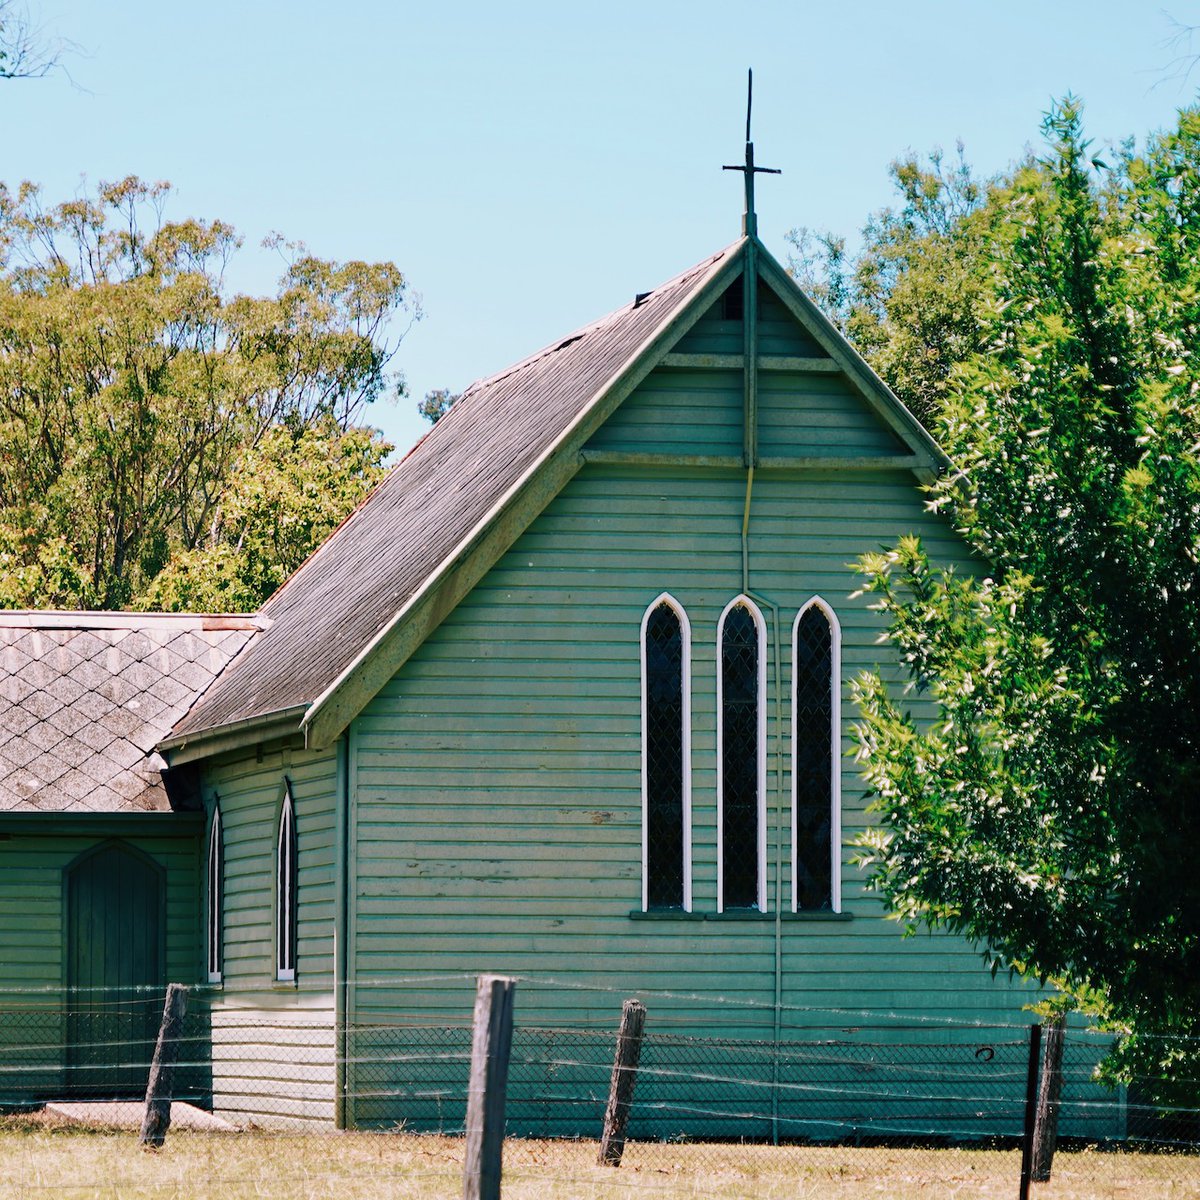 St Matthew's Anglican Church in Gundy in an interesting shade of green - dates to 1869 #gundy #nsw #upperhunter #au #latergram #bentsabout